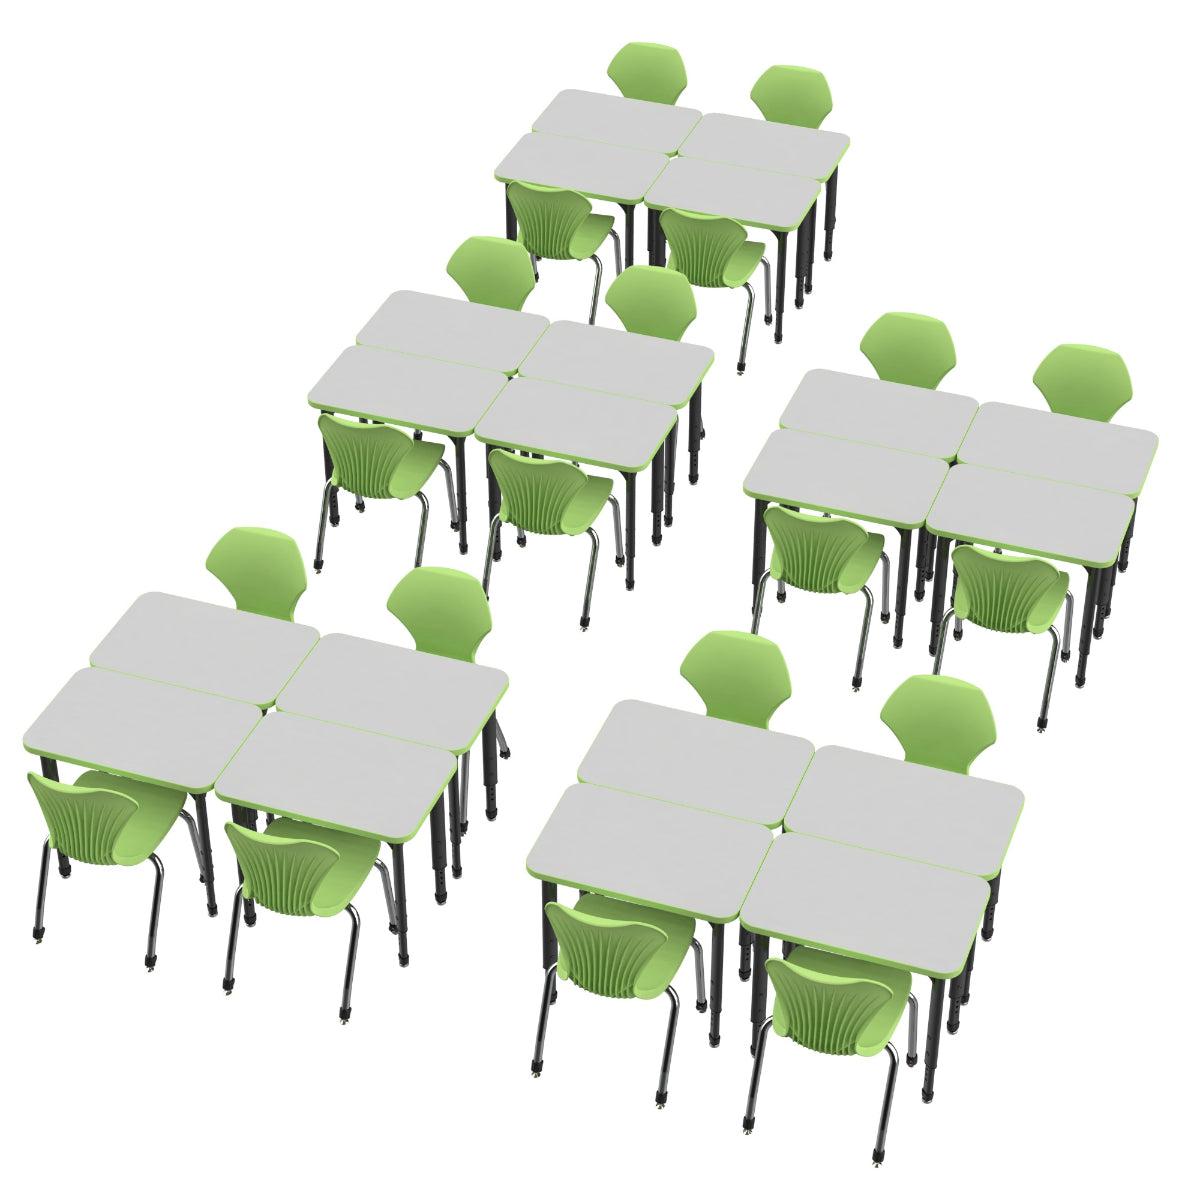 Apex Dry Erase Classroom Desk and Chair Package, 20 Rectangle Collaborative Student Desks, 24" x 30", with 20 Apex Stack Chairs